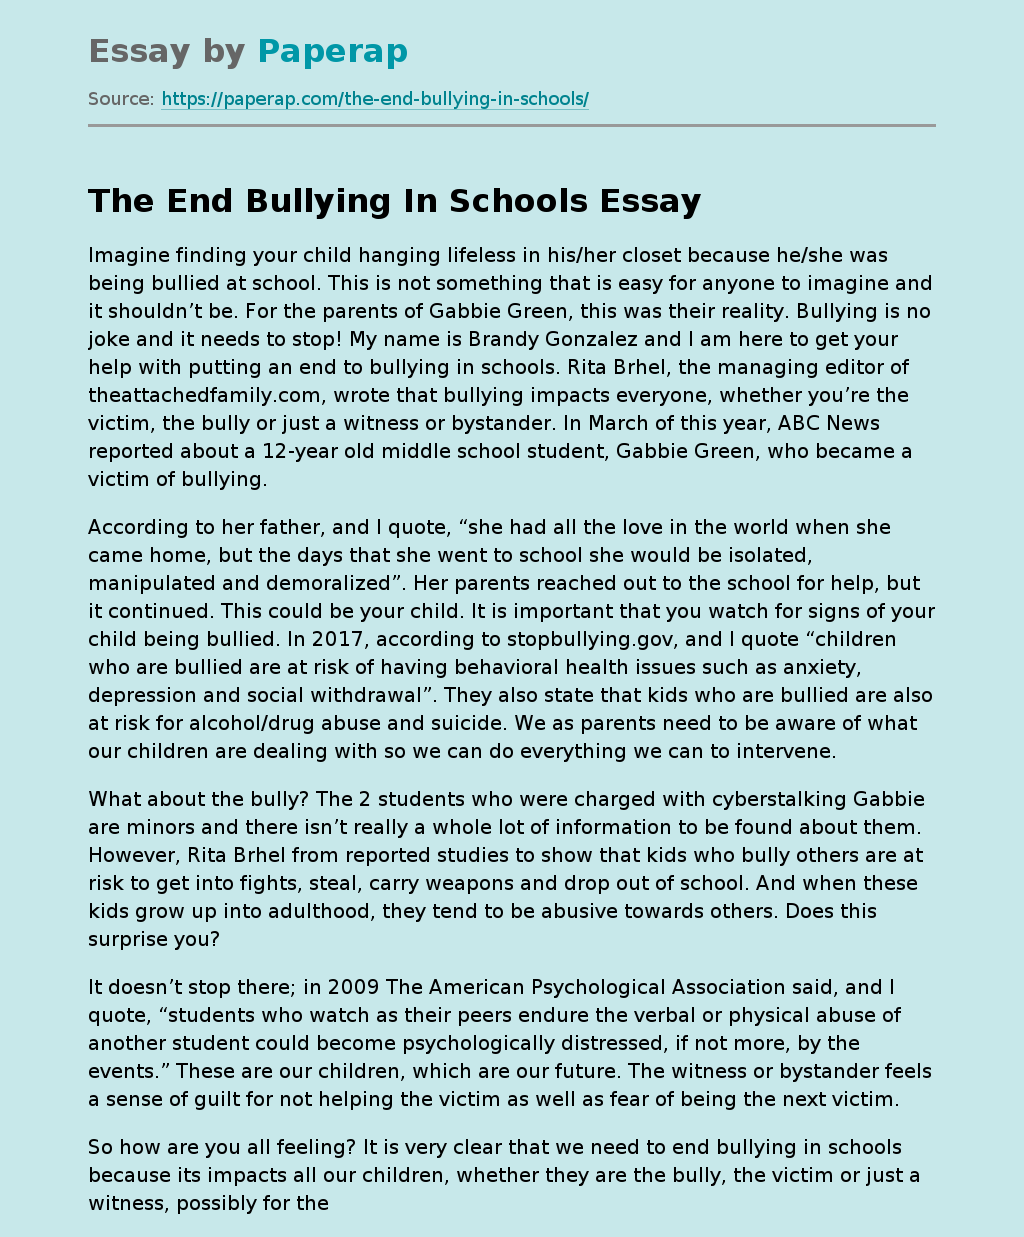 The End Bullying In Schools